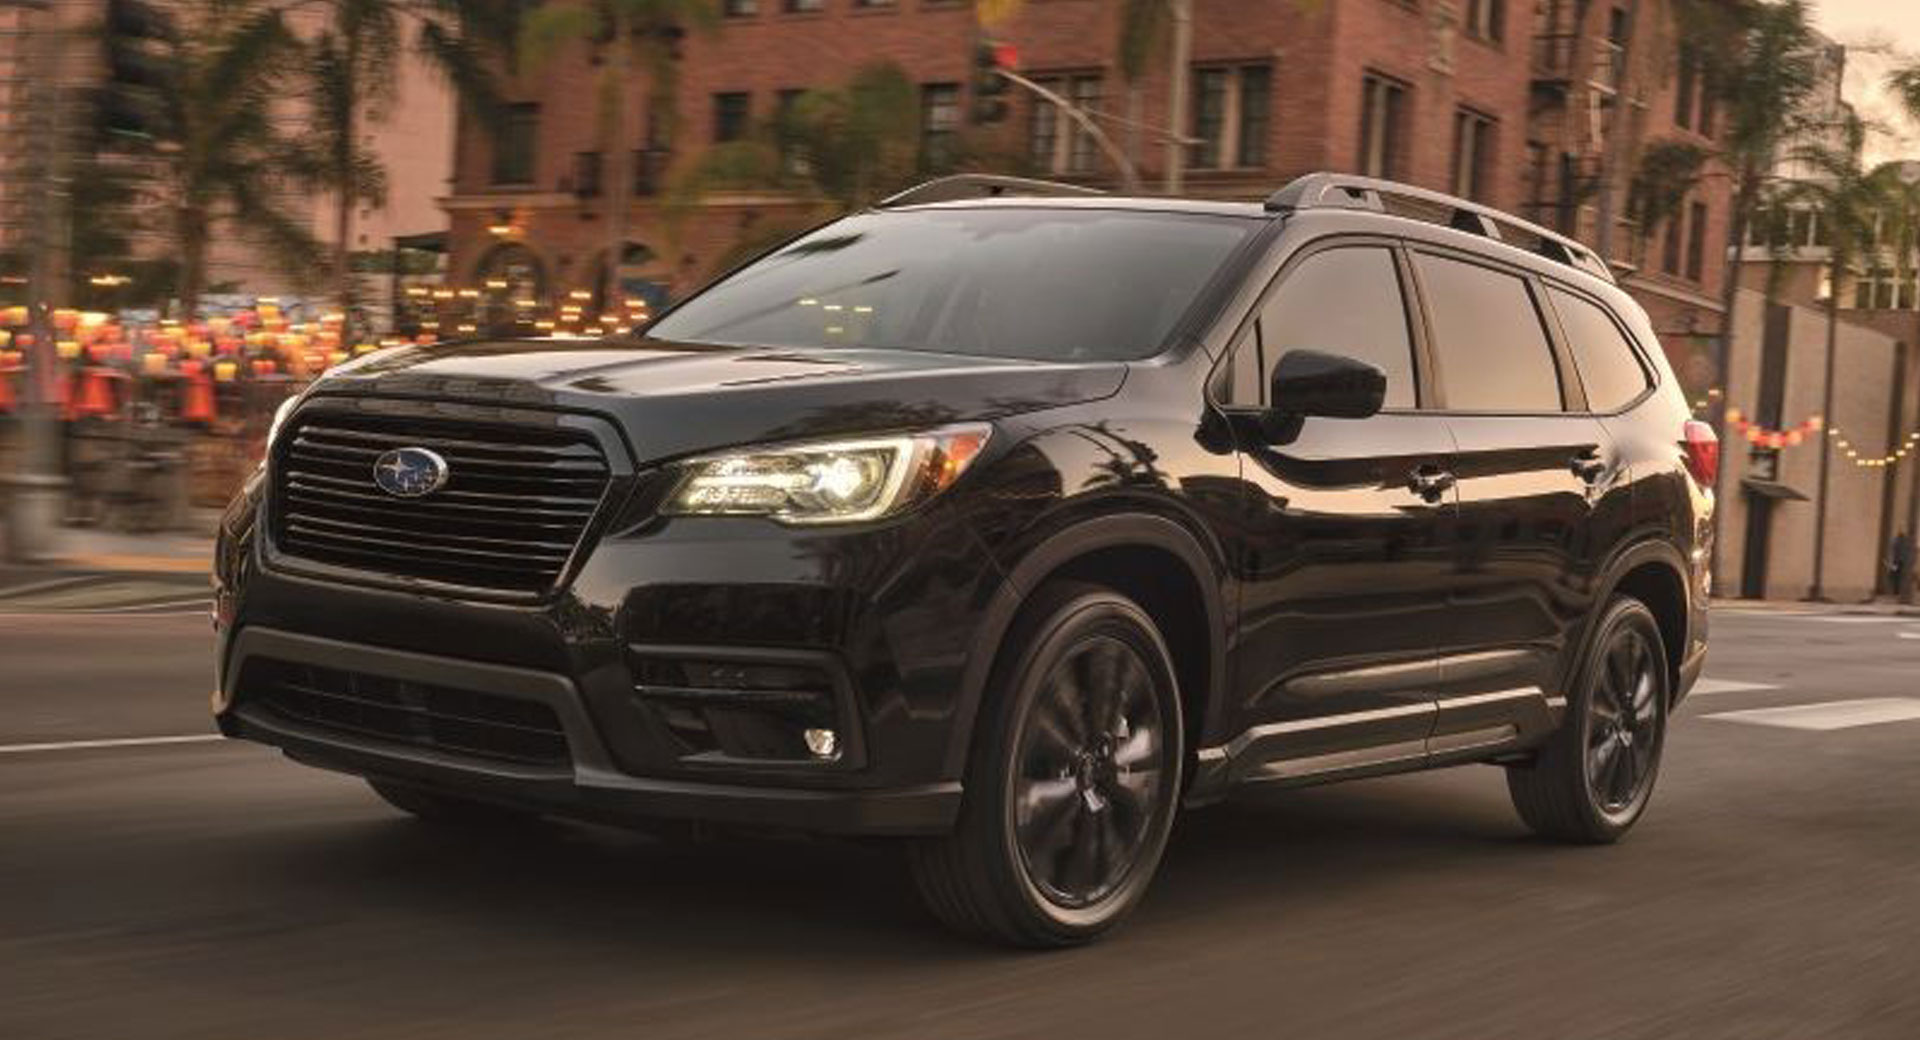 2022 Subaru Ascent Gets Onyx Edition Because There Aren’t Enough Blacked Out Models Carscoops